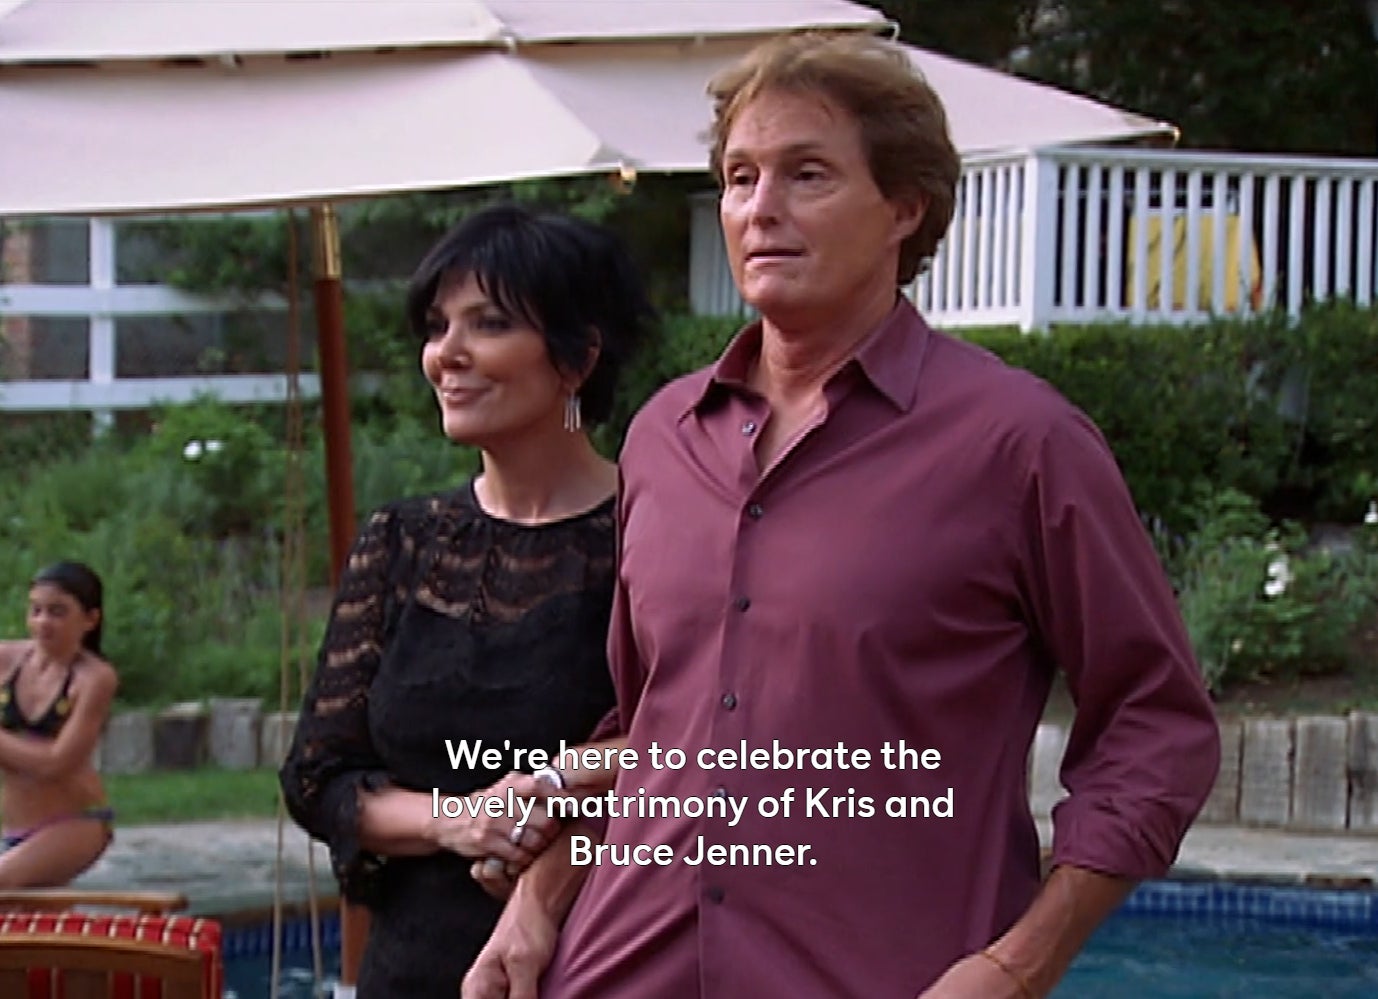 Kris Jenner and Caitlyn Jenner at their anniversary party